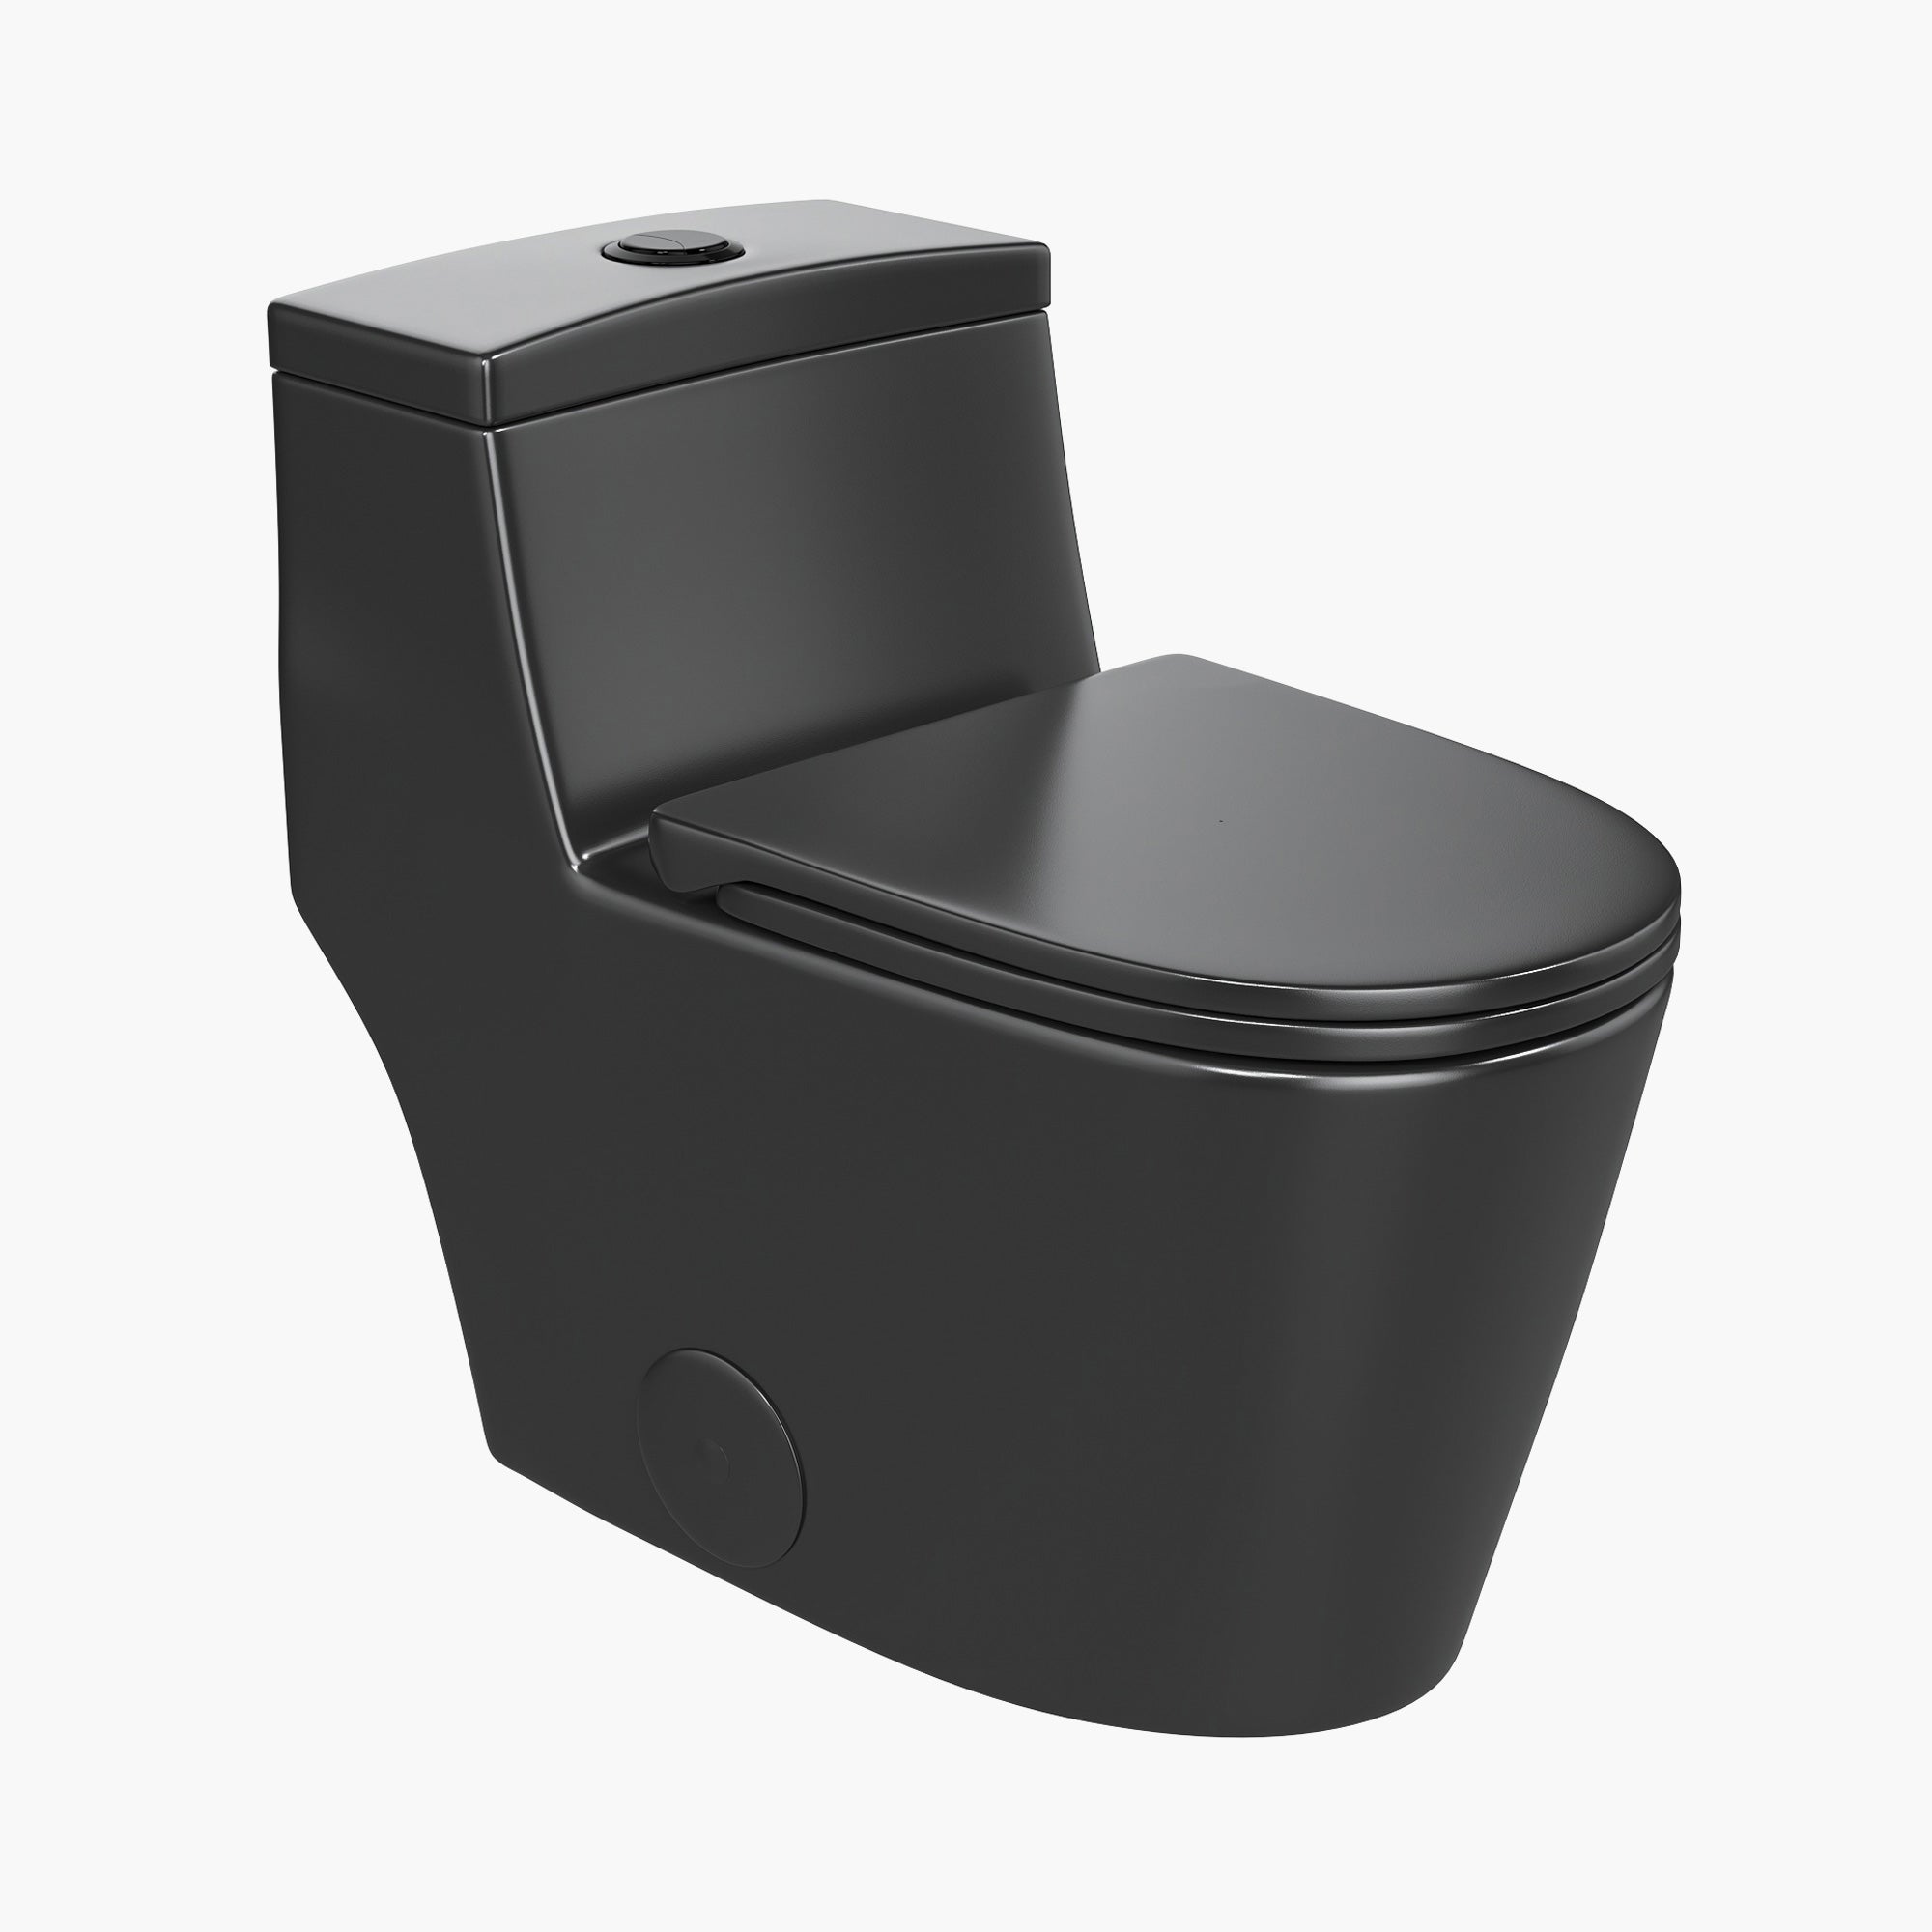 HOROW Dual Flush 1.28 GPF Elongated Toilet HOROW One Piece Toilet With Seat Model HR-T0280B